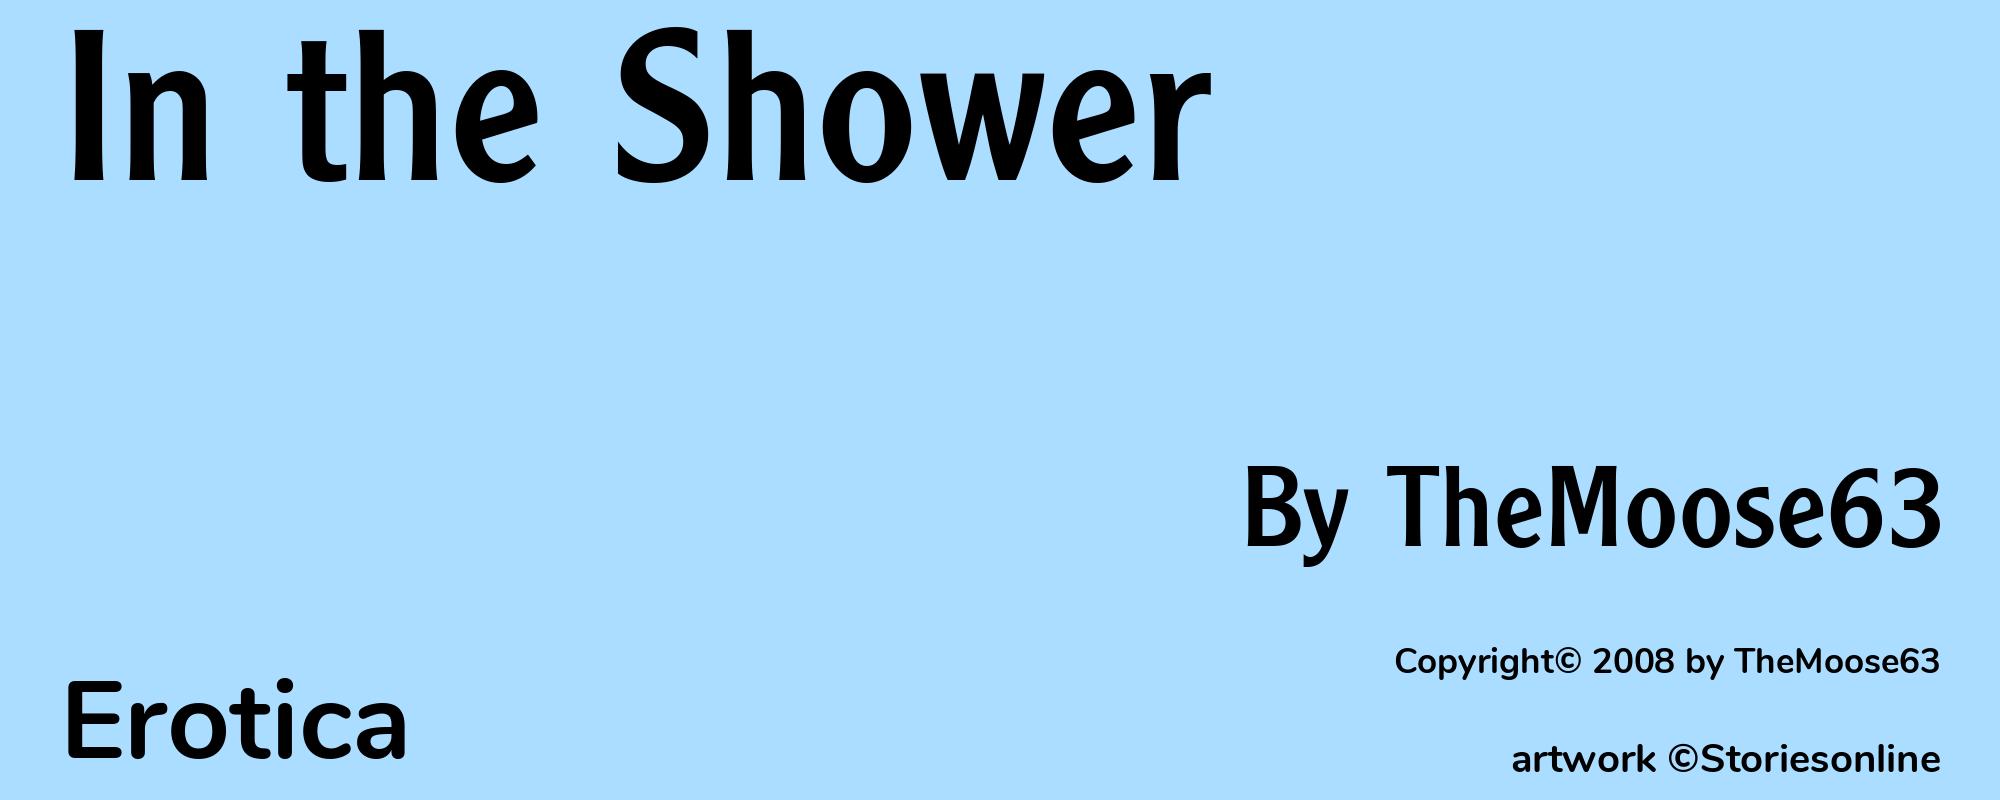 In the Shower - Cover